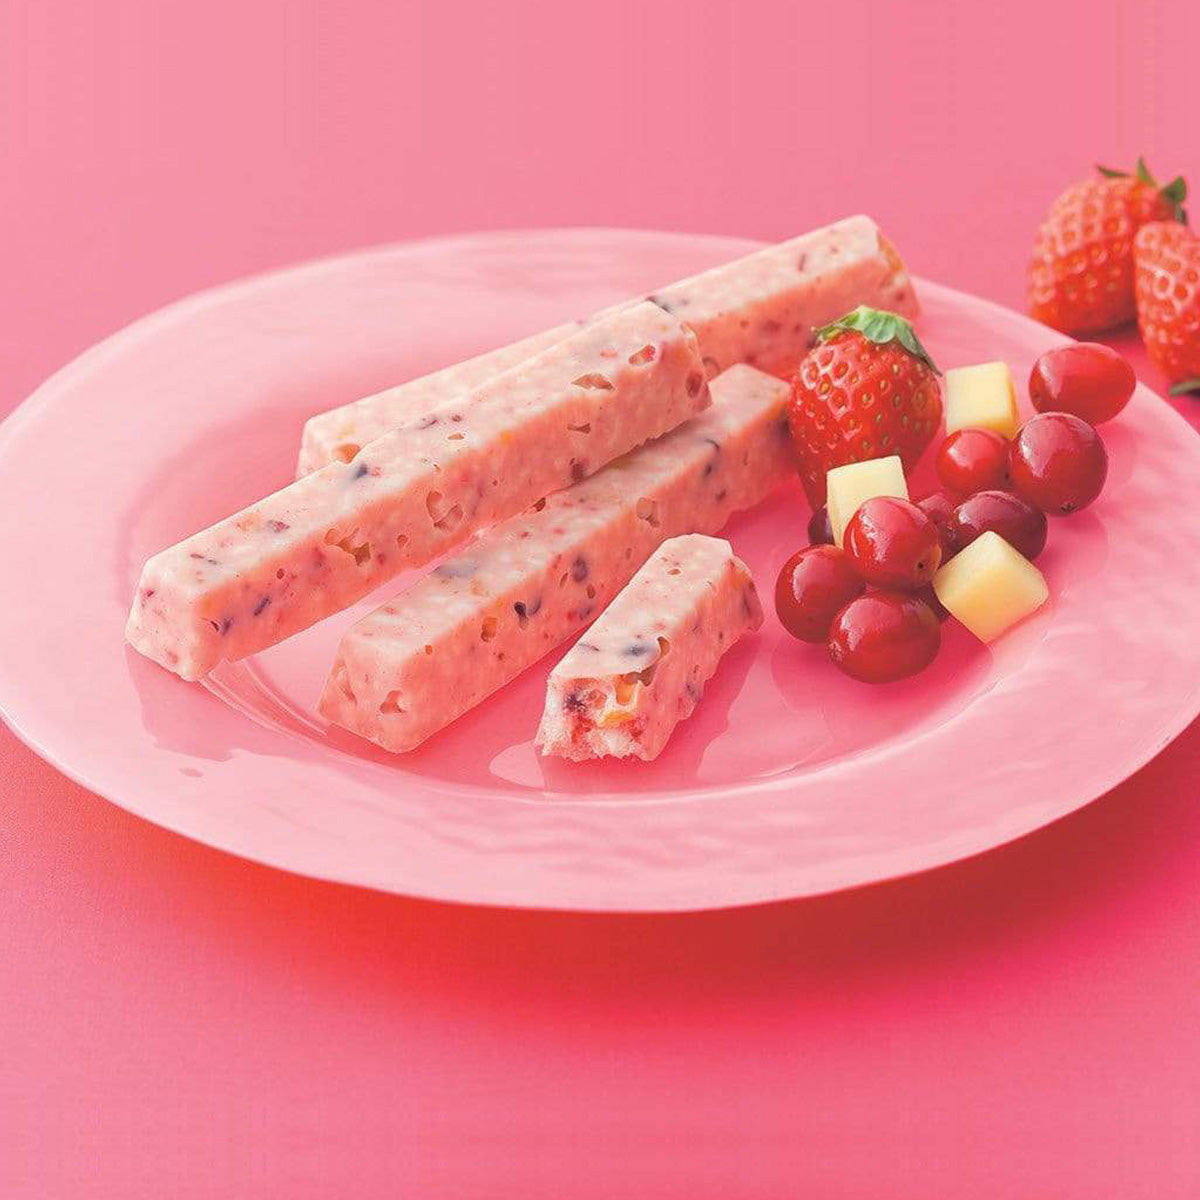 ROYCE' Chocolate - Fruit Bar Chocolate - Image shows pink chocolate bars on a pink plate with fruits such as red strawberries and grapes and yellow pineapple chunks. Background is in pink.